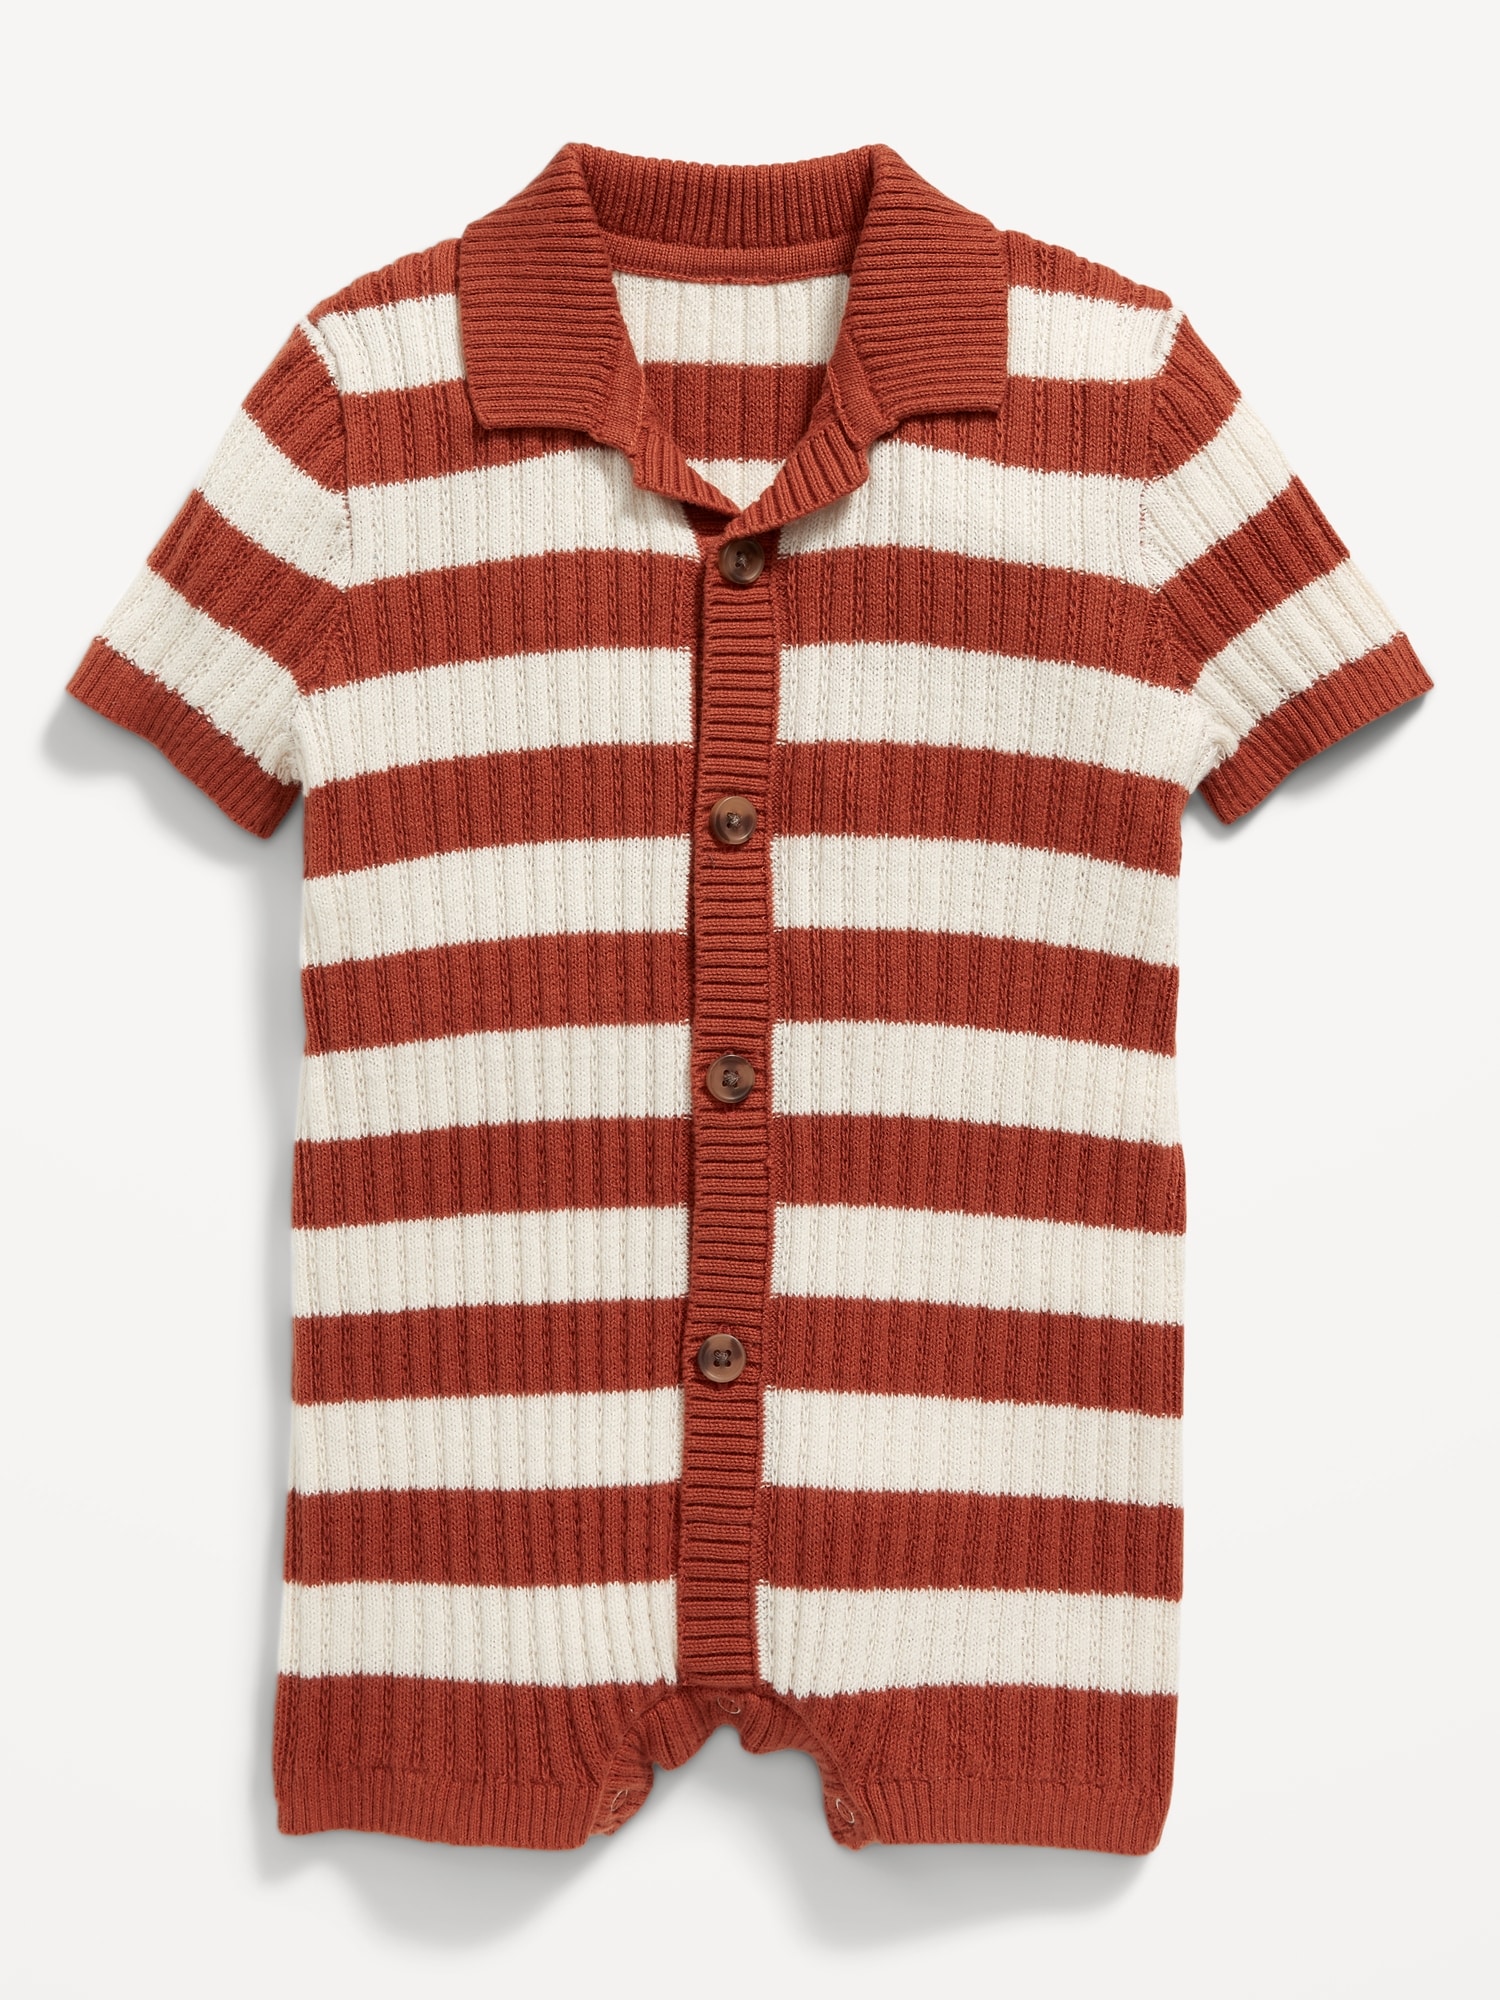 Striped Sweater-Knit Button-Front Romper for Baby